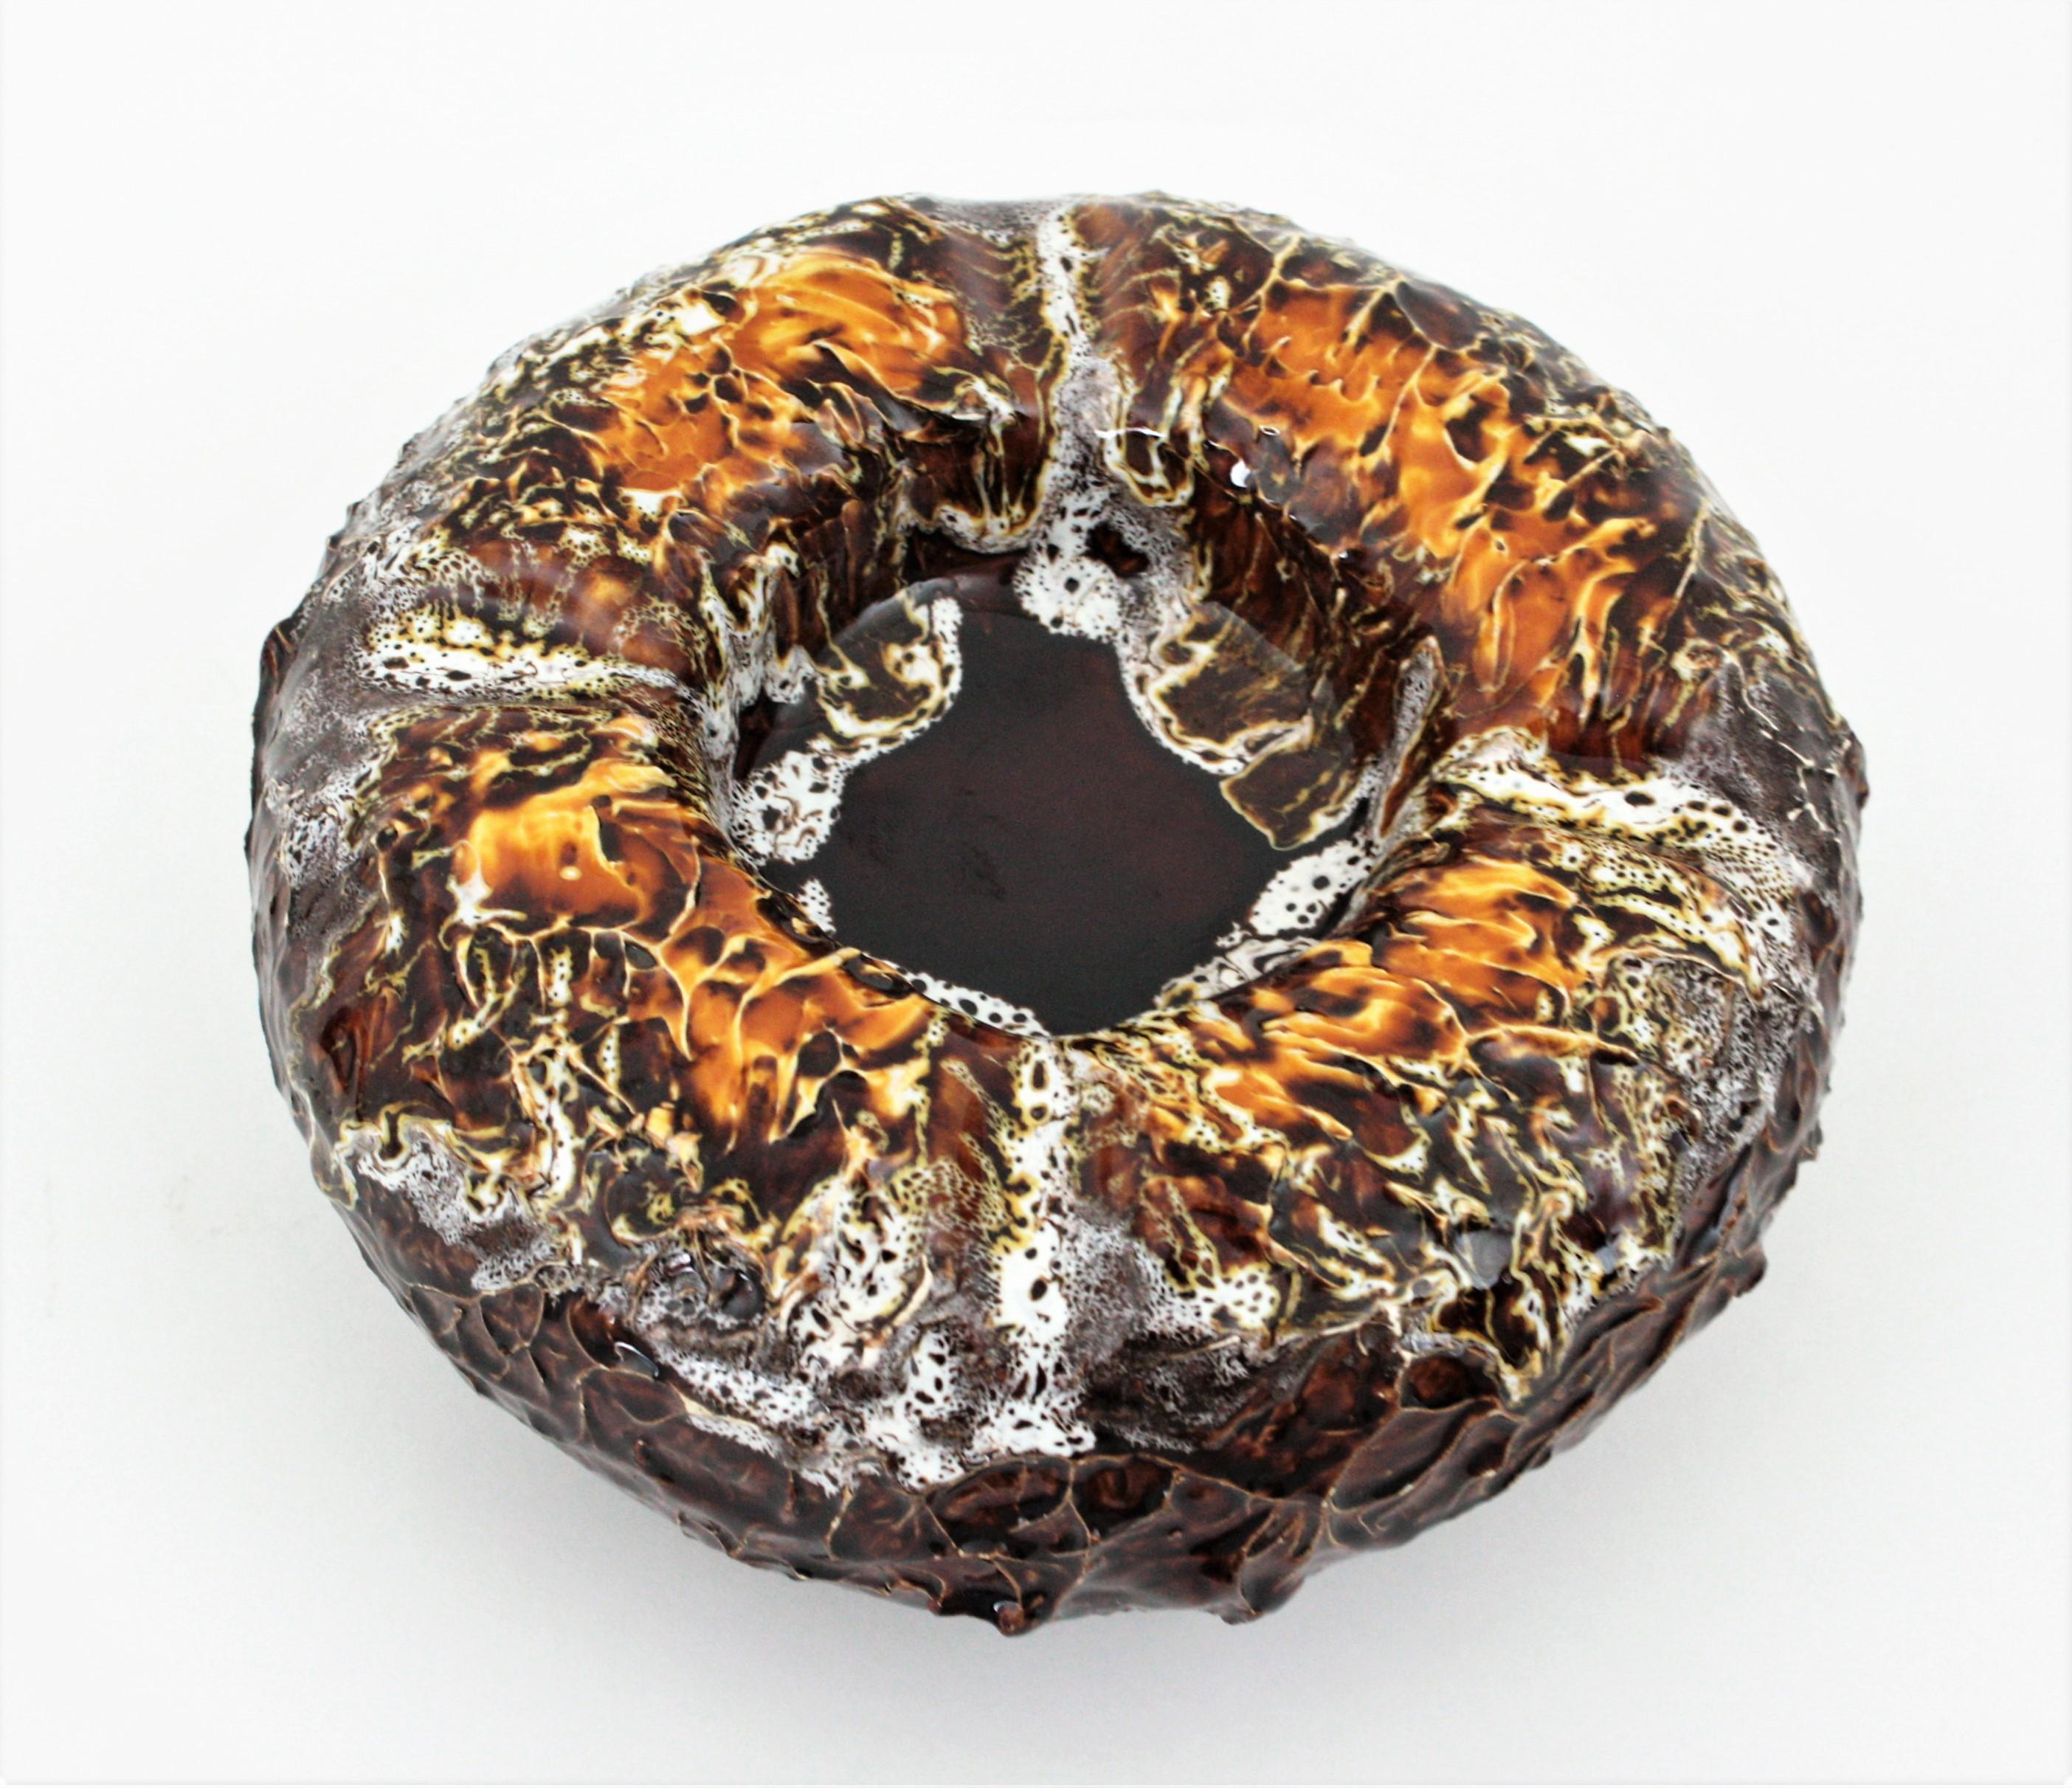 Hand-Crafted French Vallauris Ceramic Fat Lava Round Ashtray / Bowl, 1950s For Sale